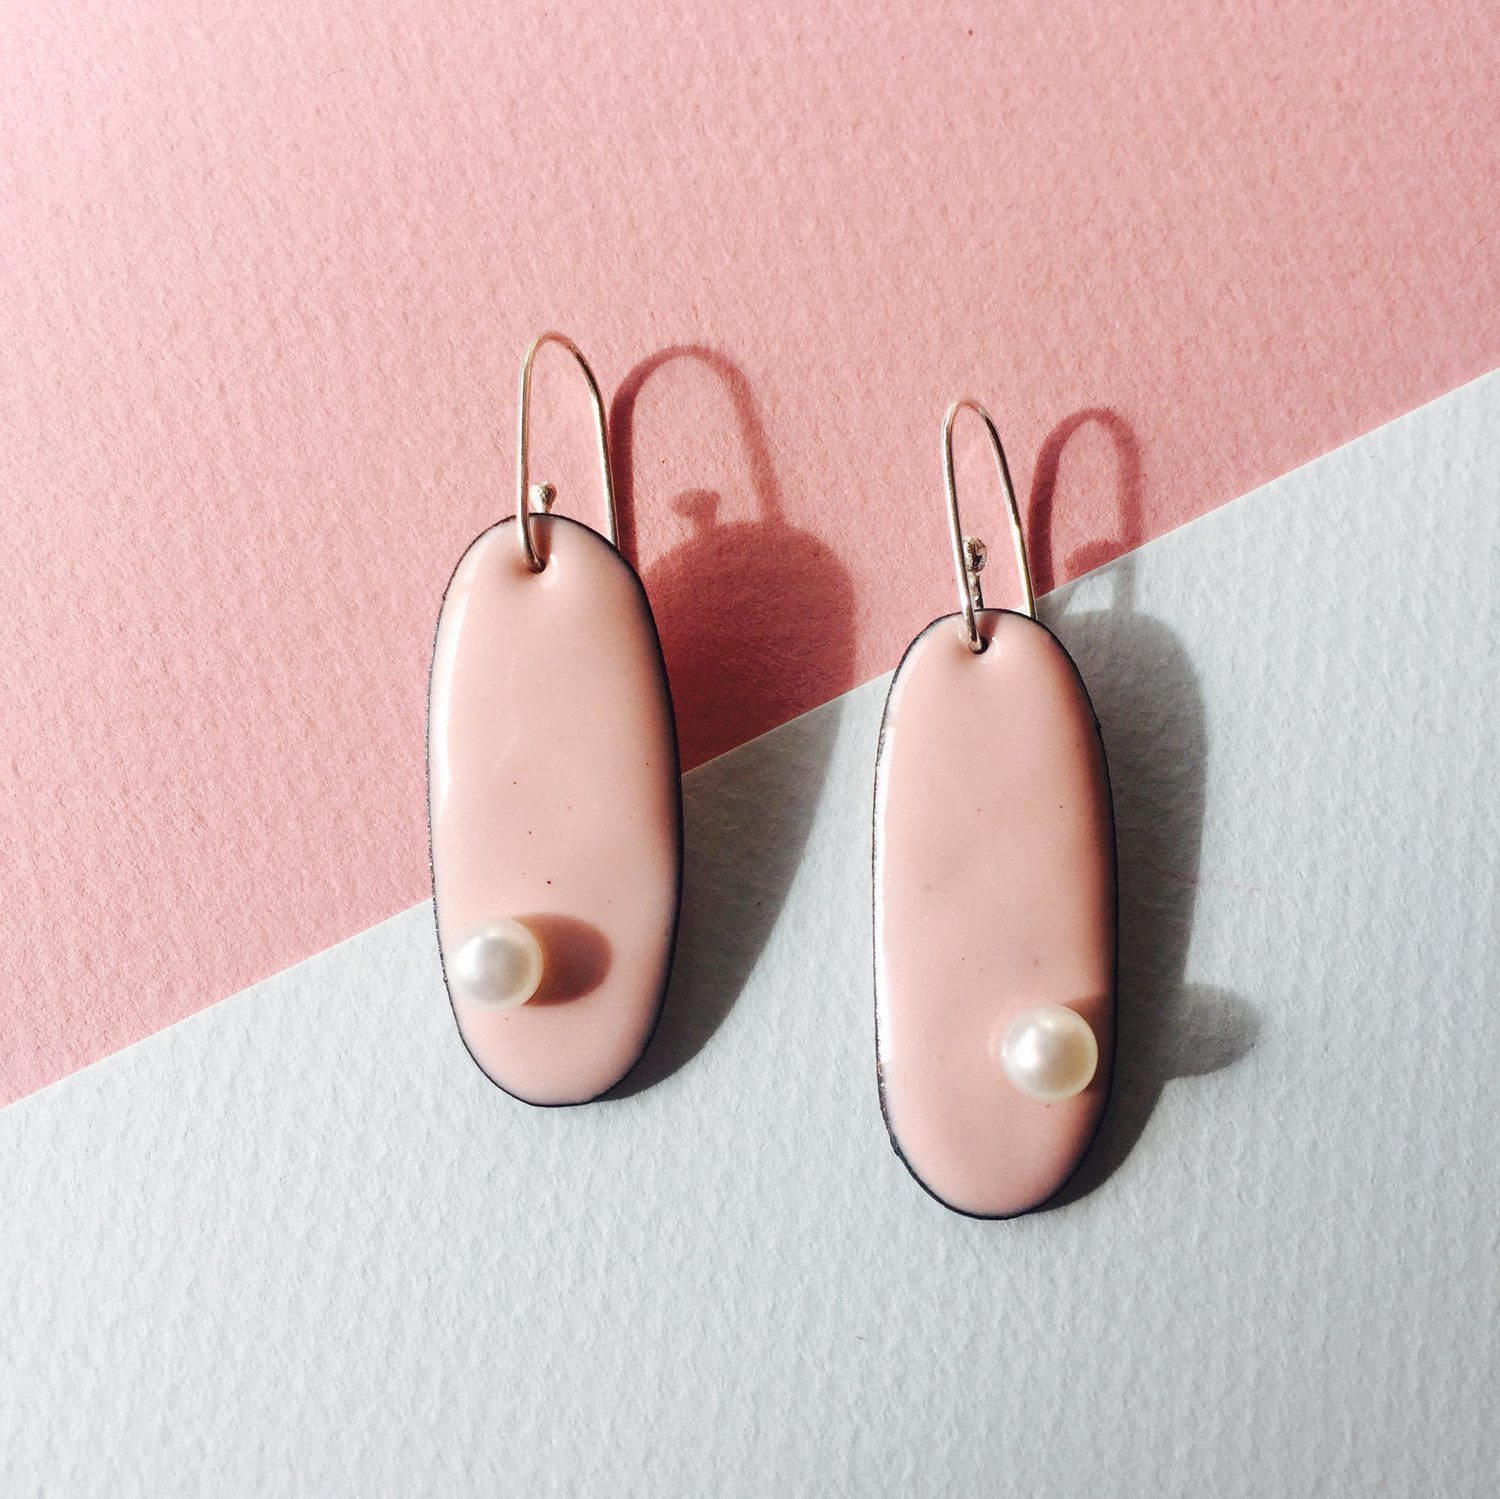 Image of Pearlies earring drops - blush pink - small